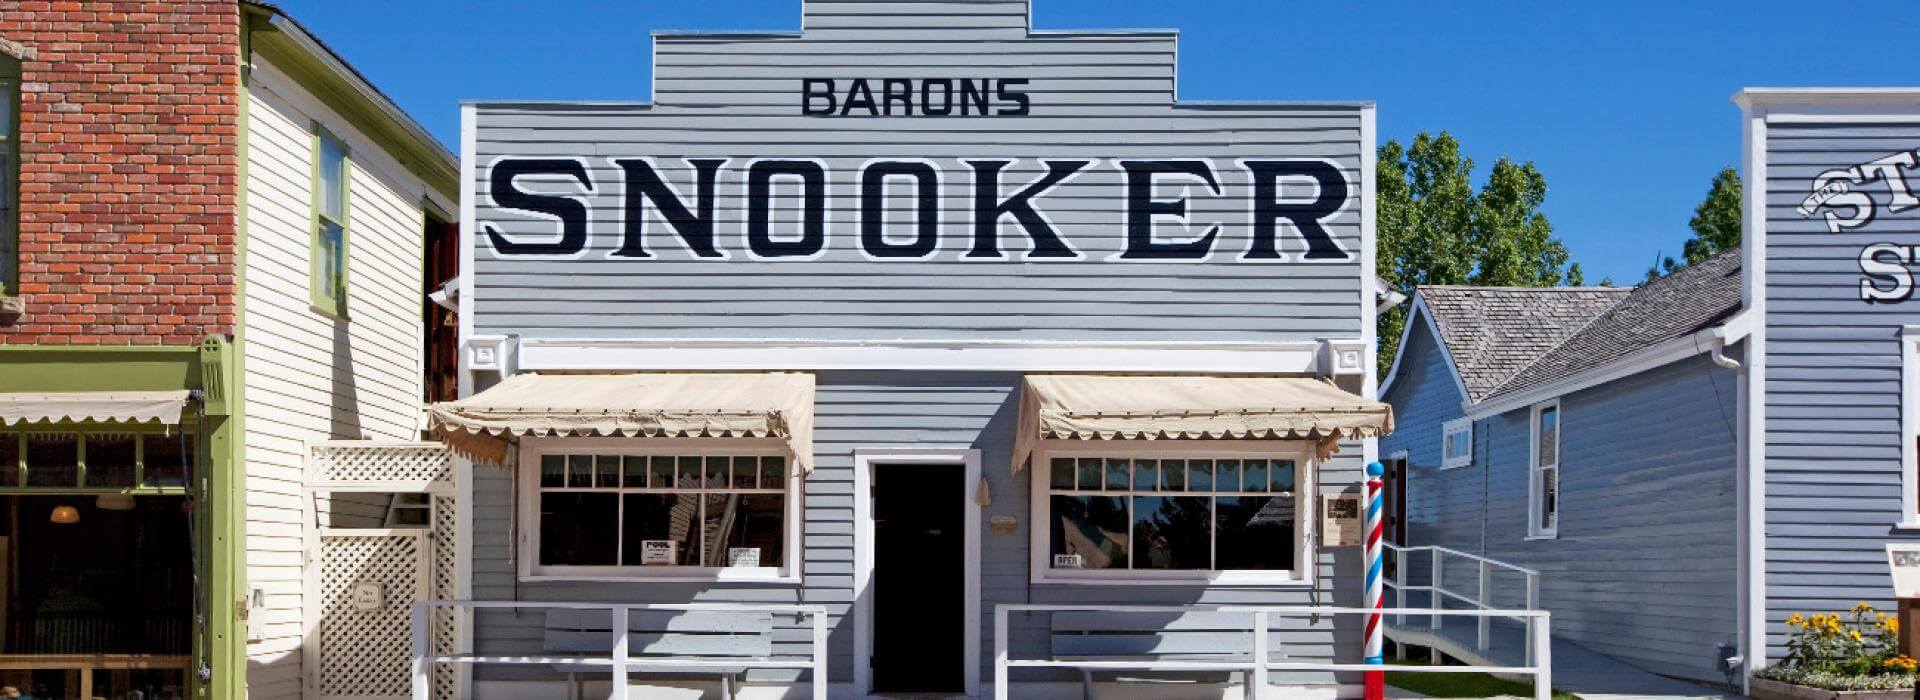 2 story building that says Barons Snooker